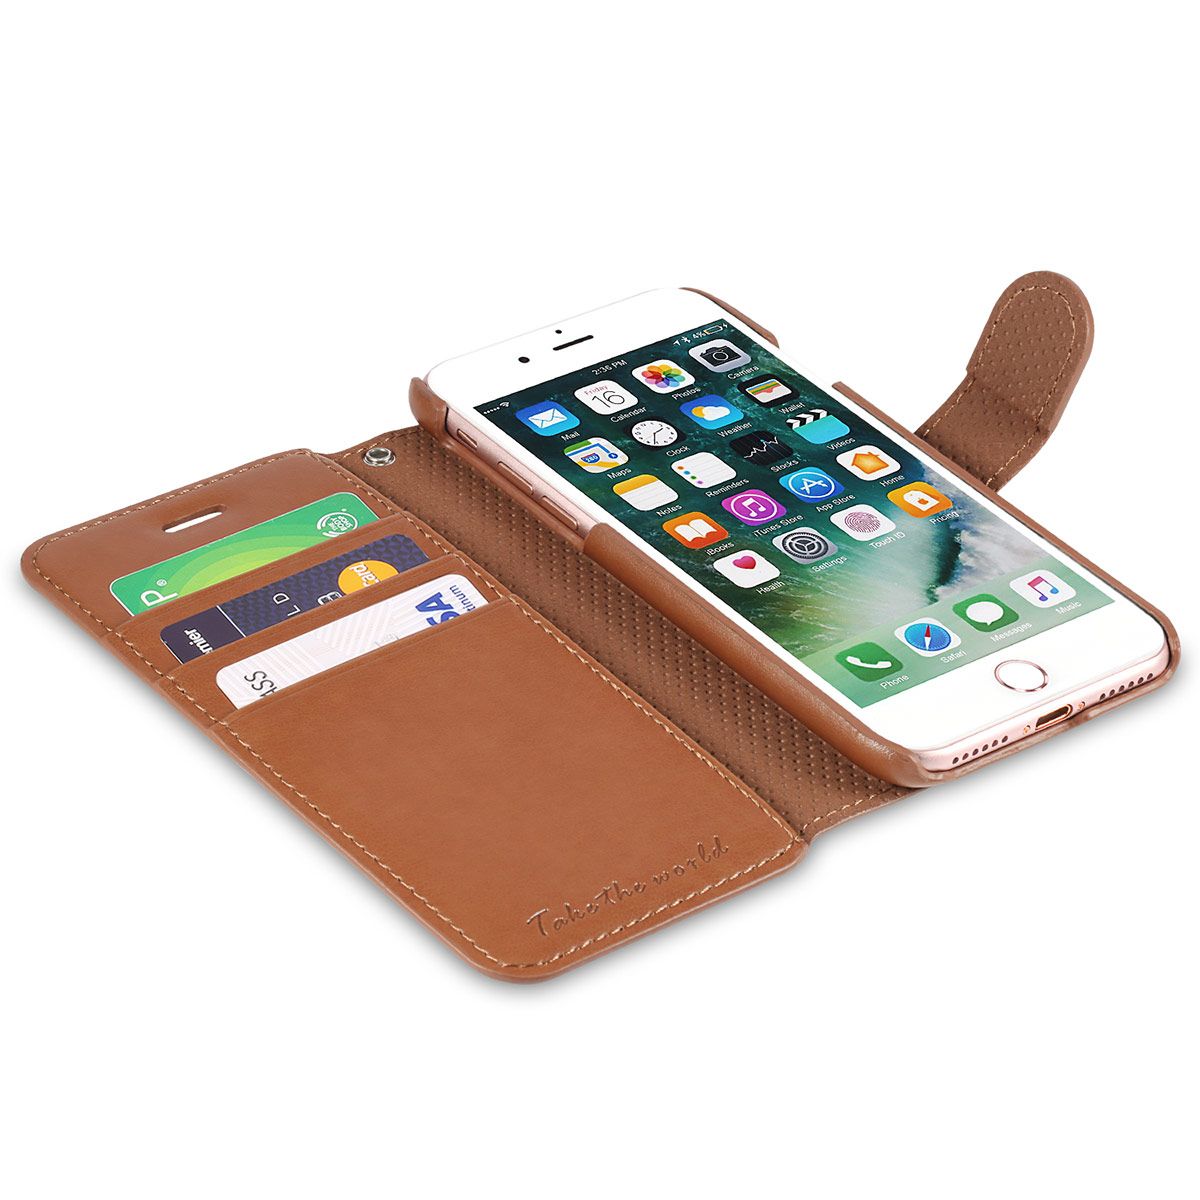 Optional Wrist Strap for Model P1 Wallet Case, for iPhone 8, 7, 6s